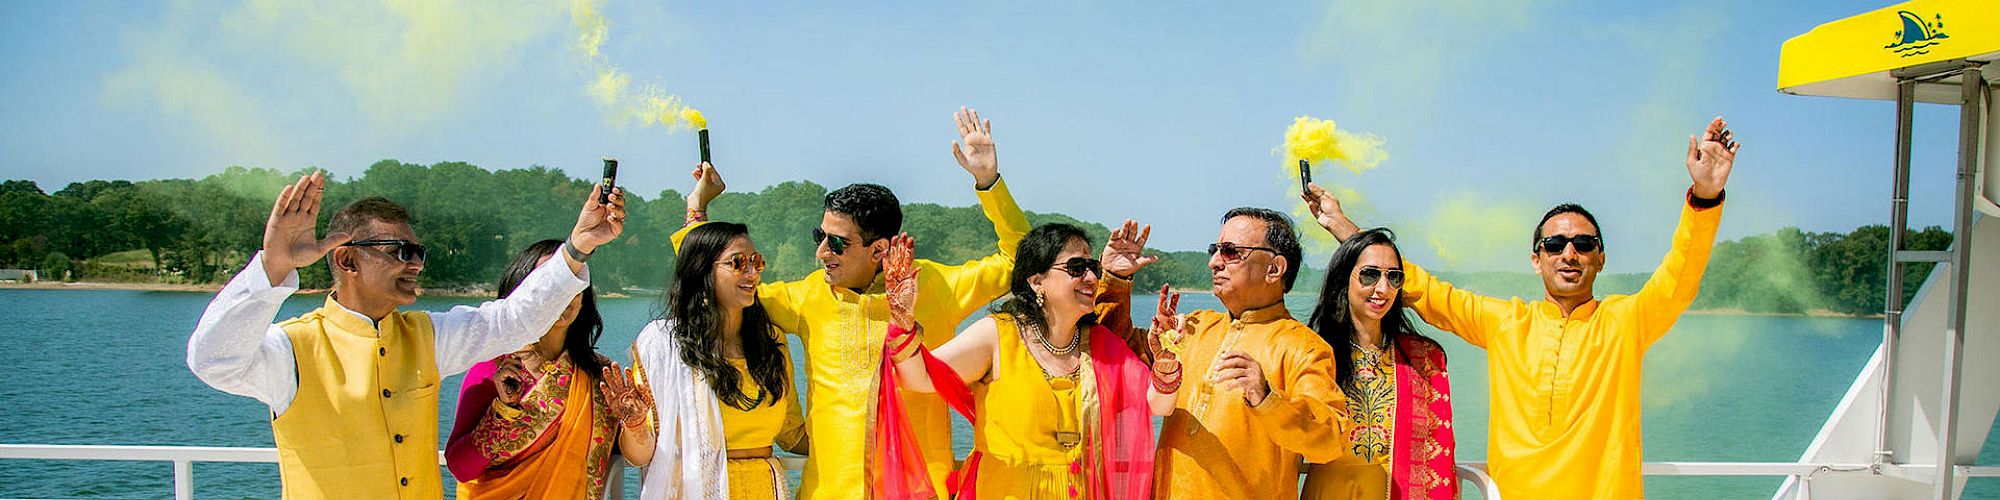 A group of people dressed in vibrant yellow and orange outfits, holding colored smoke sticks, standing on a boat with water and trees in the background.